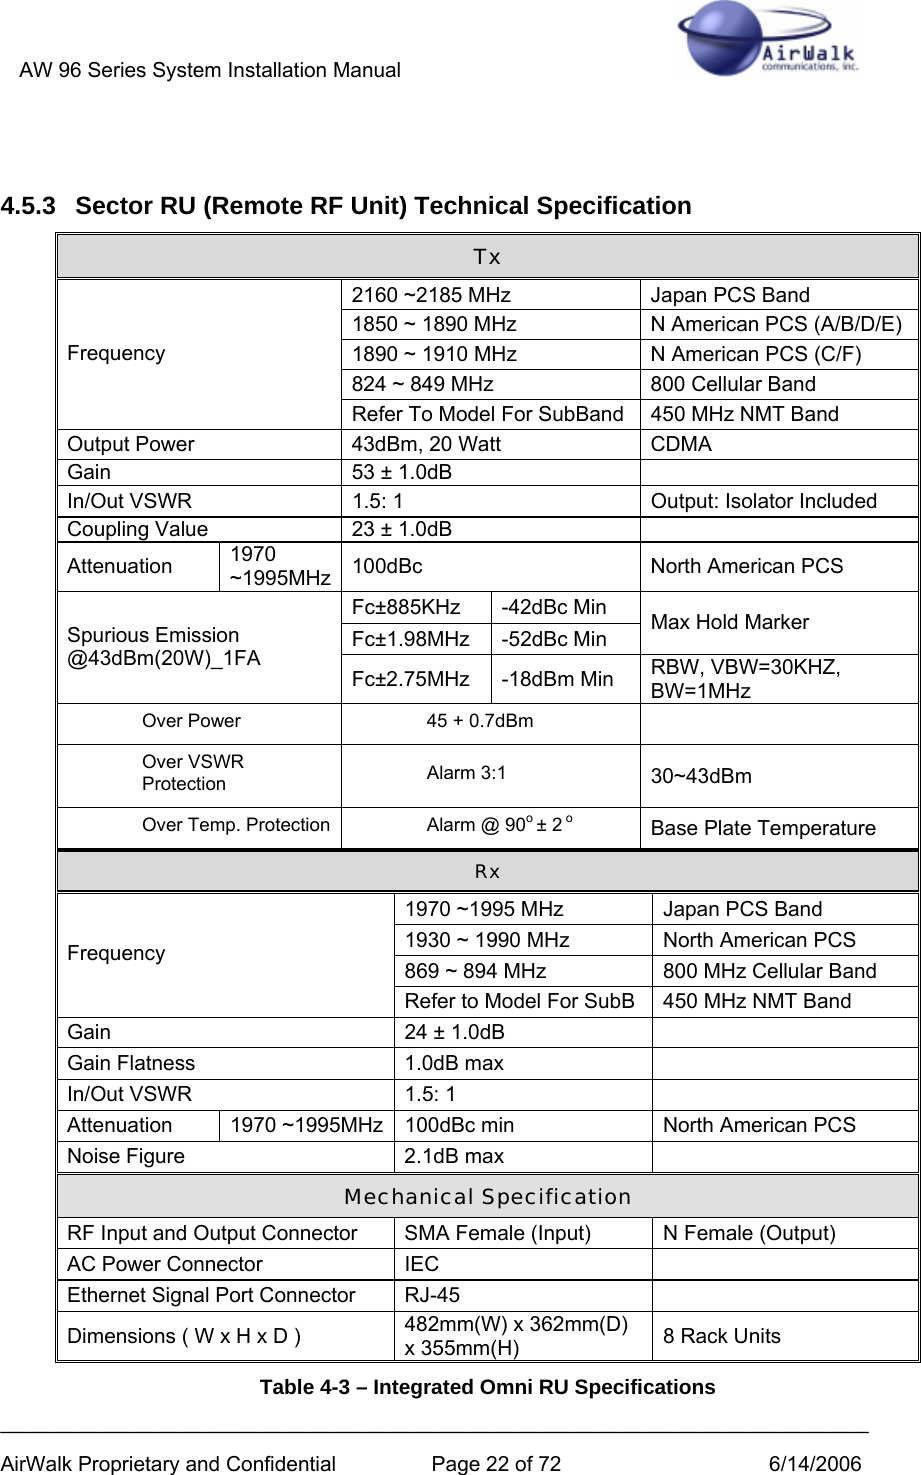 AW 96 Series System Installation Manual          ___________________________________________________________________________ AirWalk Proprietary and Confidential  Page 22 of 72  6/14/2006  4.5.3  Sector RU (Remote RF Unit) Technical Specification Tx 2160 ~2185 MHz  Japan PCS Band 1850 ~ 1890 MHz  N American PCS (A/B/D/E) 1890 ~ 1910 MHz  N American PCS (C/F) 824 ~ 849 MHz  800 Cellular Band Frequency Refer To Model For SubBand  450 MHz NMT Band Output Power  43dBm, 20 Watt  CDMA Gain  53 ± 1.0dB   In/Out VSWR  1.5: 1  Output: Isolator Included Coupling Value  23 ± 1.0dB   Attenuation  1970 ~1995MHz 100dBc  North American PCS Fc±885KHz -42dBc Min Fc±1.98MHz -52dBc Min  Max Hold Marker  Spurious Emission @43dBm(20W)_1FA Fc±2.75MHz -18dBm Min  RBW, VBW=30KHZ, BW=1MHz Over Power  45 + 0.7dBm   Over VSWR Protection  Alarm 3:1  30~43dBm Over Temp. Protection  Alarm @ 90o ± 2 o Base Plate Temperature Rx 1970 ~1995 MHz  Japan PCS Band 1930 ~ 1990 MHz  North American PCS 869 ~ 894 MHz  800 MHz Cellular Band Frequency Refer to Model For SubB  450 MHz NMT Band Gain   24 ± 1.0dB   Gain Flatness  1.0dB max   In/Out VSWR  1.5: 1    Attenuation  1970 ~1995MHz 100dBc min  North American PCS Noise Figure  2.1dB max   Mechanical Specification RF Input and Output Connector  SMA Female (Input)  N Female (Output) AC Power Connector  IEC   Ethernet Signal Port Connector  RJ-45   Dimensions ( W x H x D )  482mm(W) x 362mm(D) x 355mm(H)  8 Rack Units Table 4-3 – Integrated Omni RU Specifications 